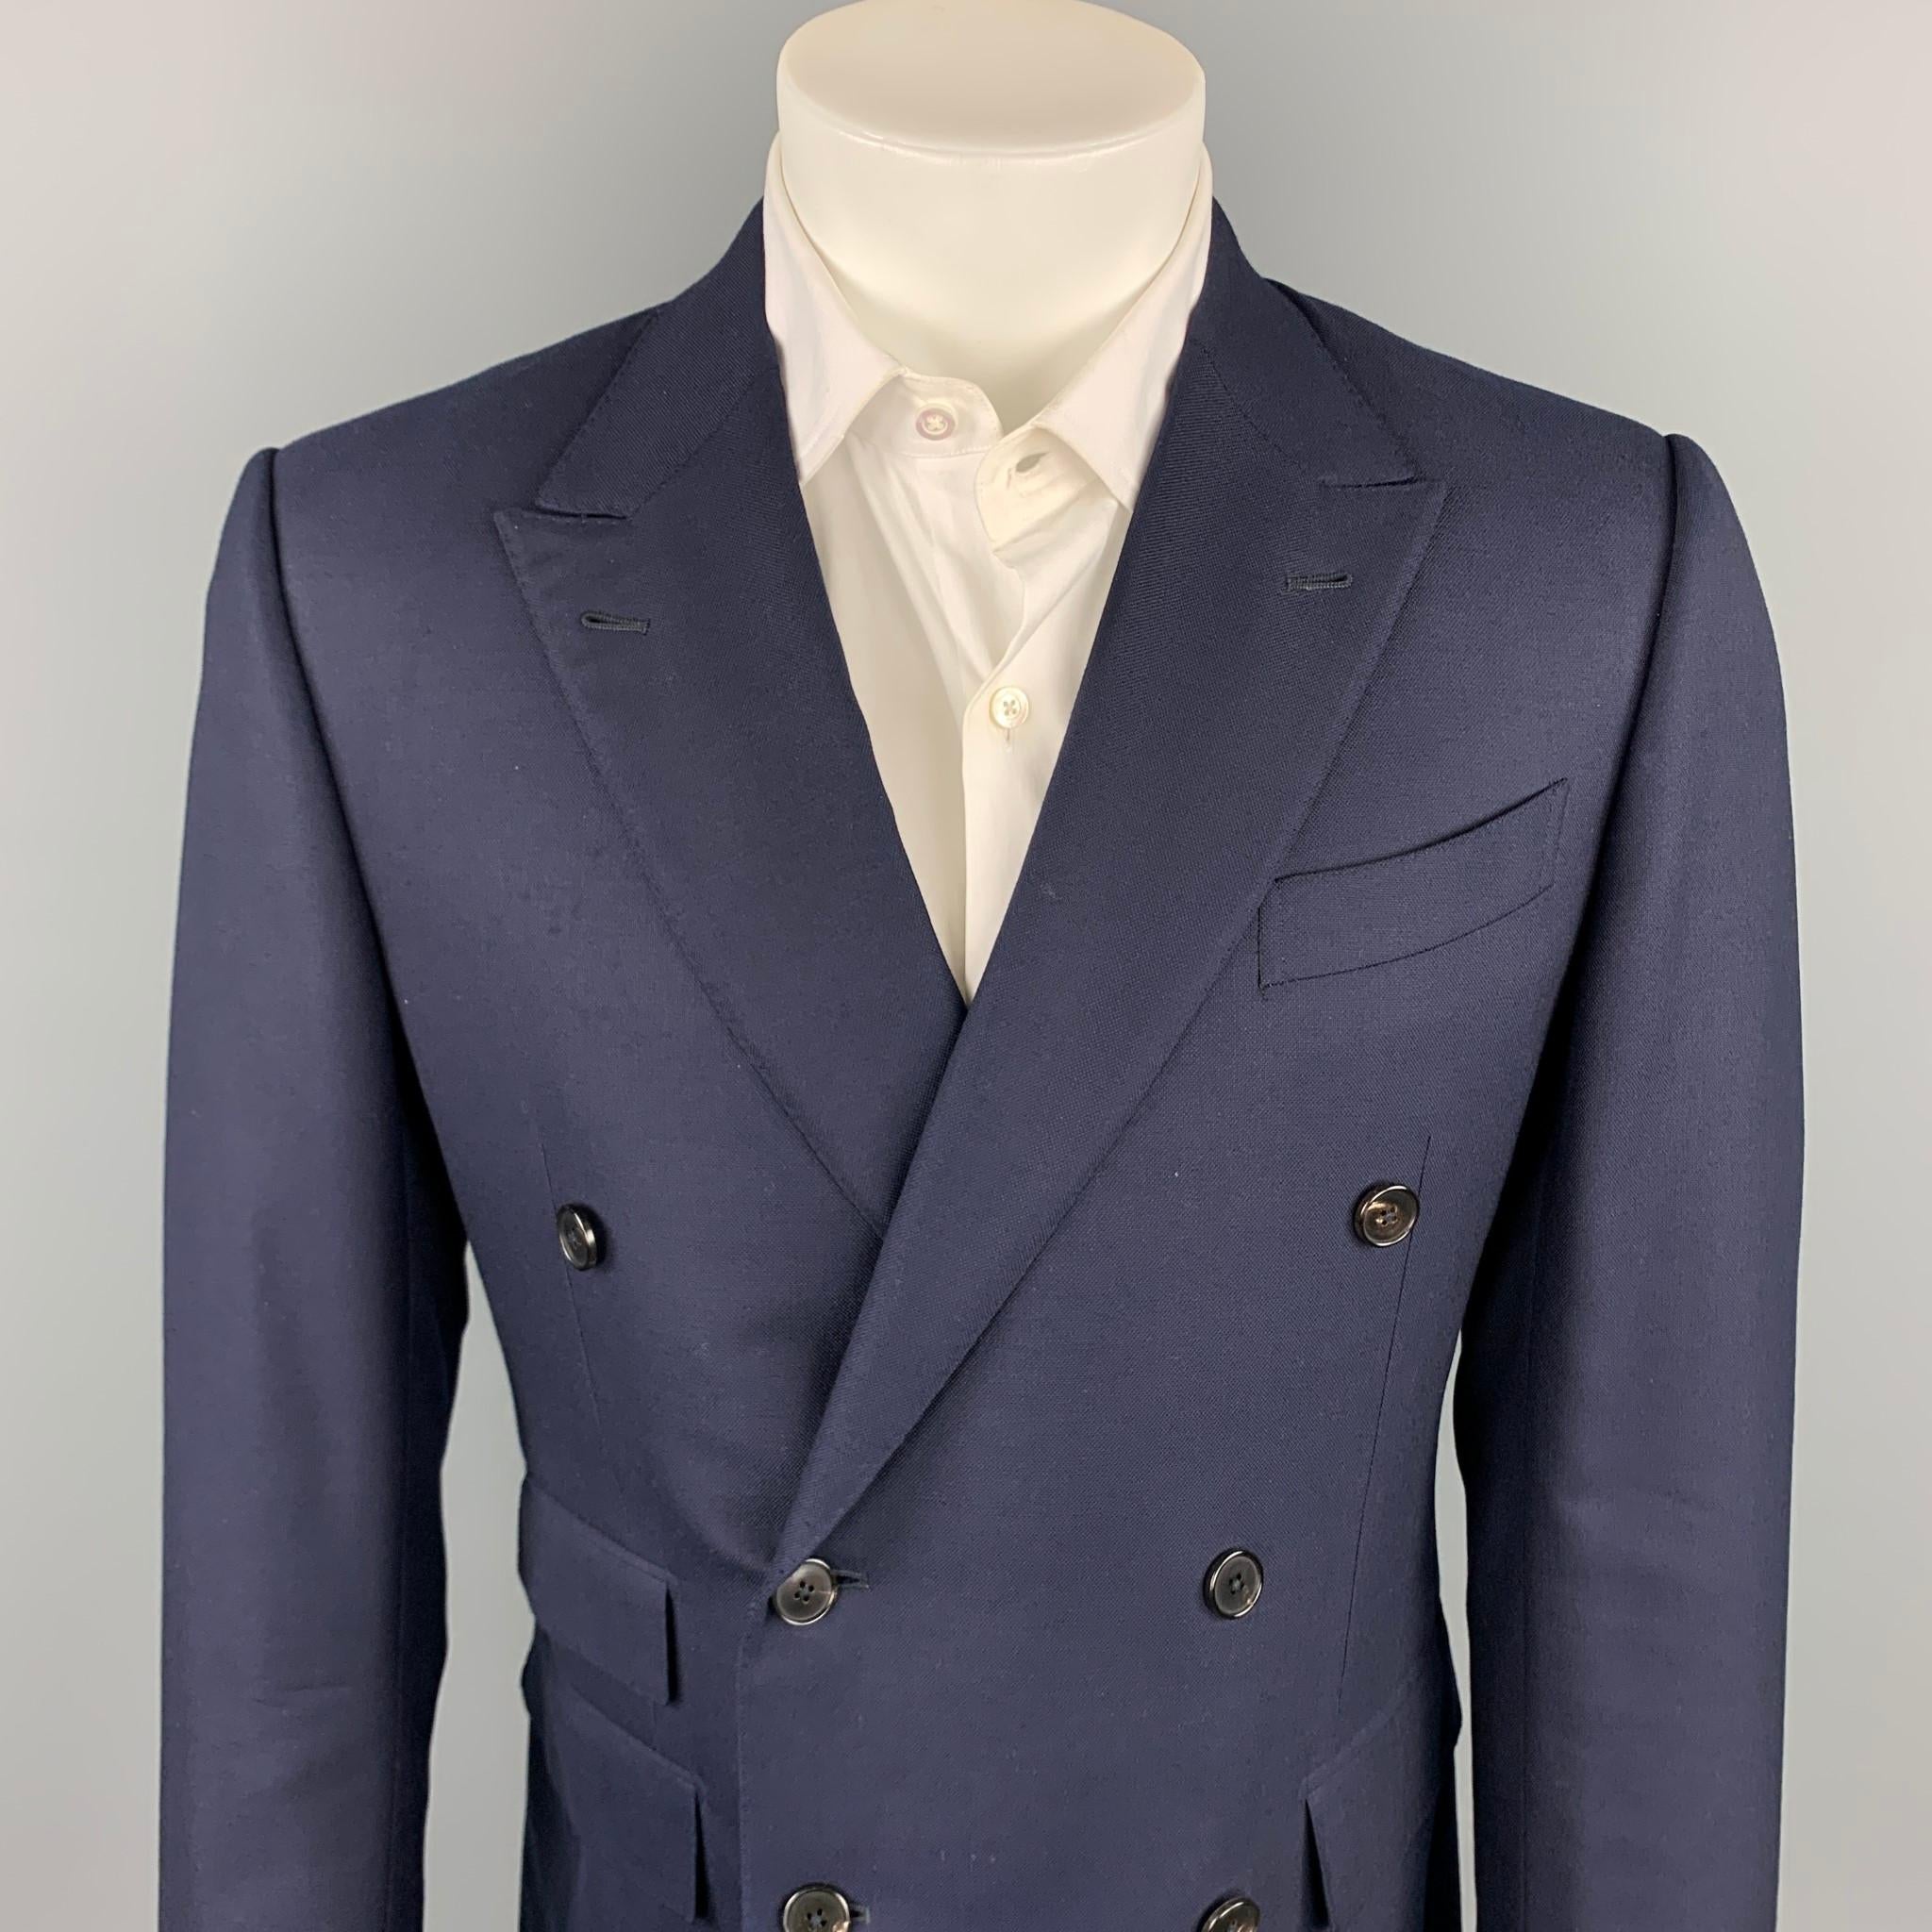 ERMENEGILDO ZEGNA custom sport coat comes in a navy wool with a full liner featuring a peak lapel, flap pockets, and a double breasted closure. Made in Italy.

Very Good Pre-Owned Condition.
Marked: 50 R

Measurements:

Shoulder: 17.5 in.
Chest: 38